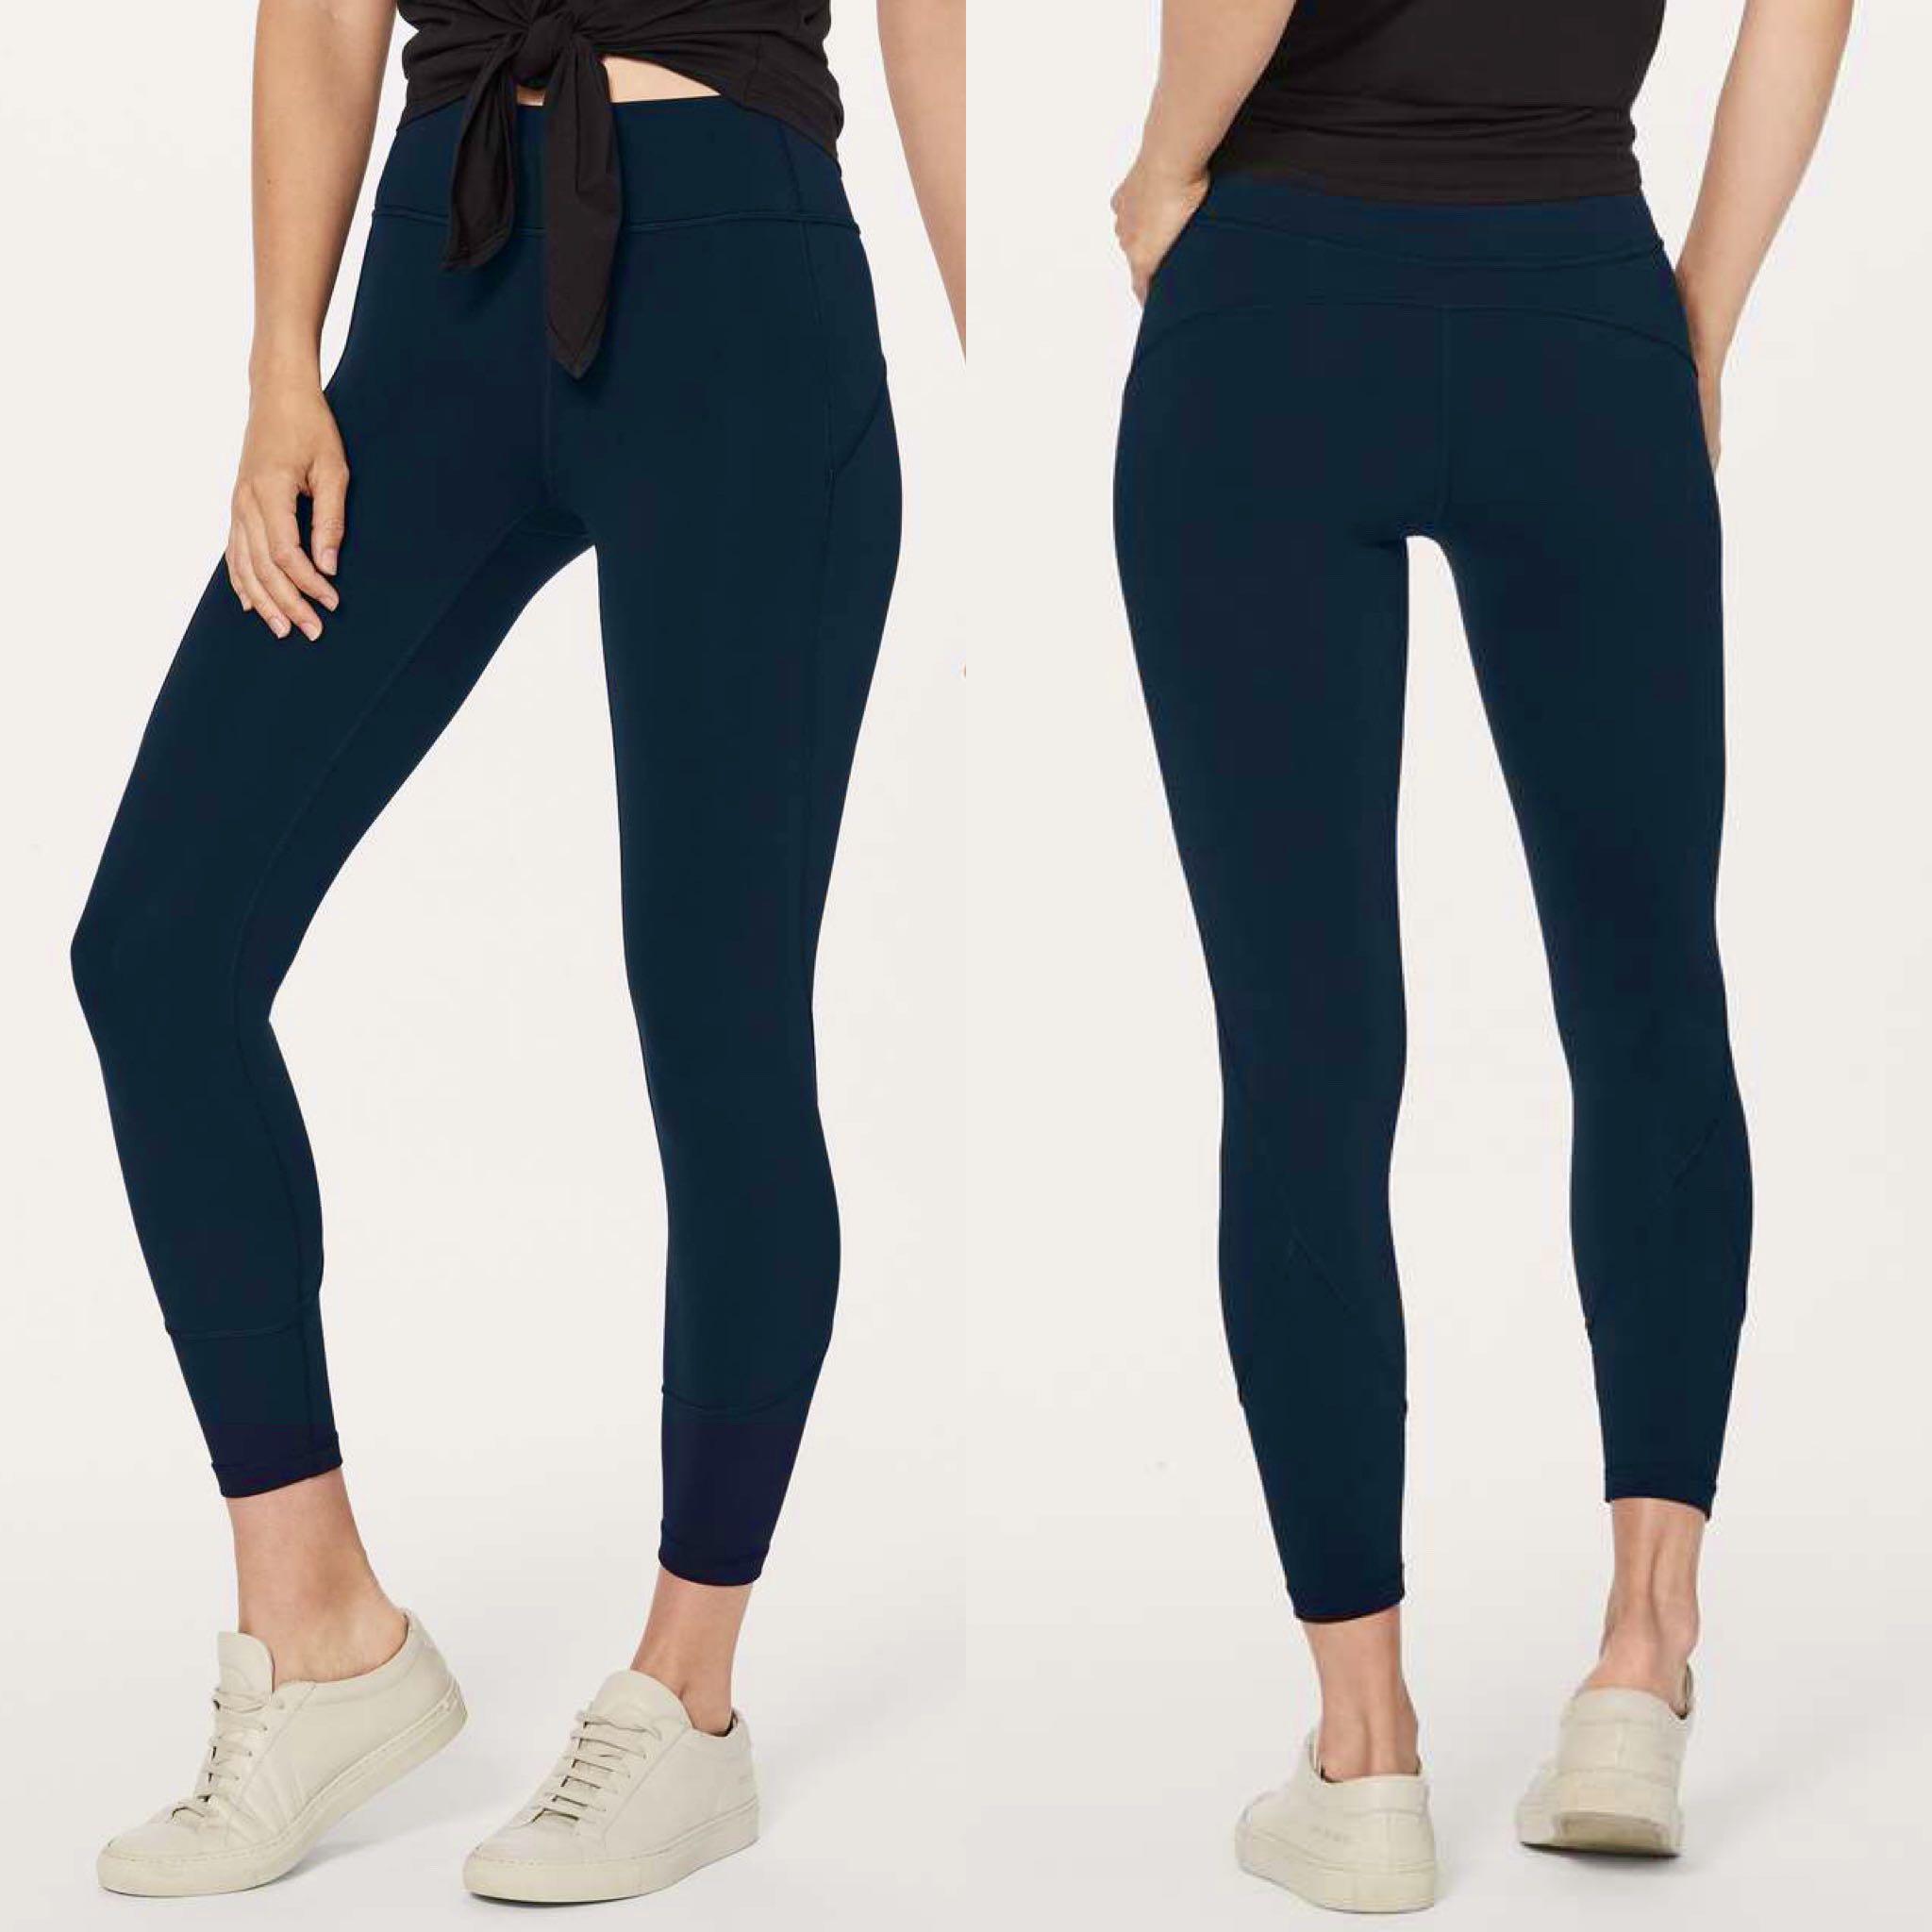 Lululemon In Movement HR Tight 25 - Nocturnal Teal size 4, Women's  Fashion, Activewear on Carousell